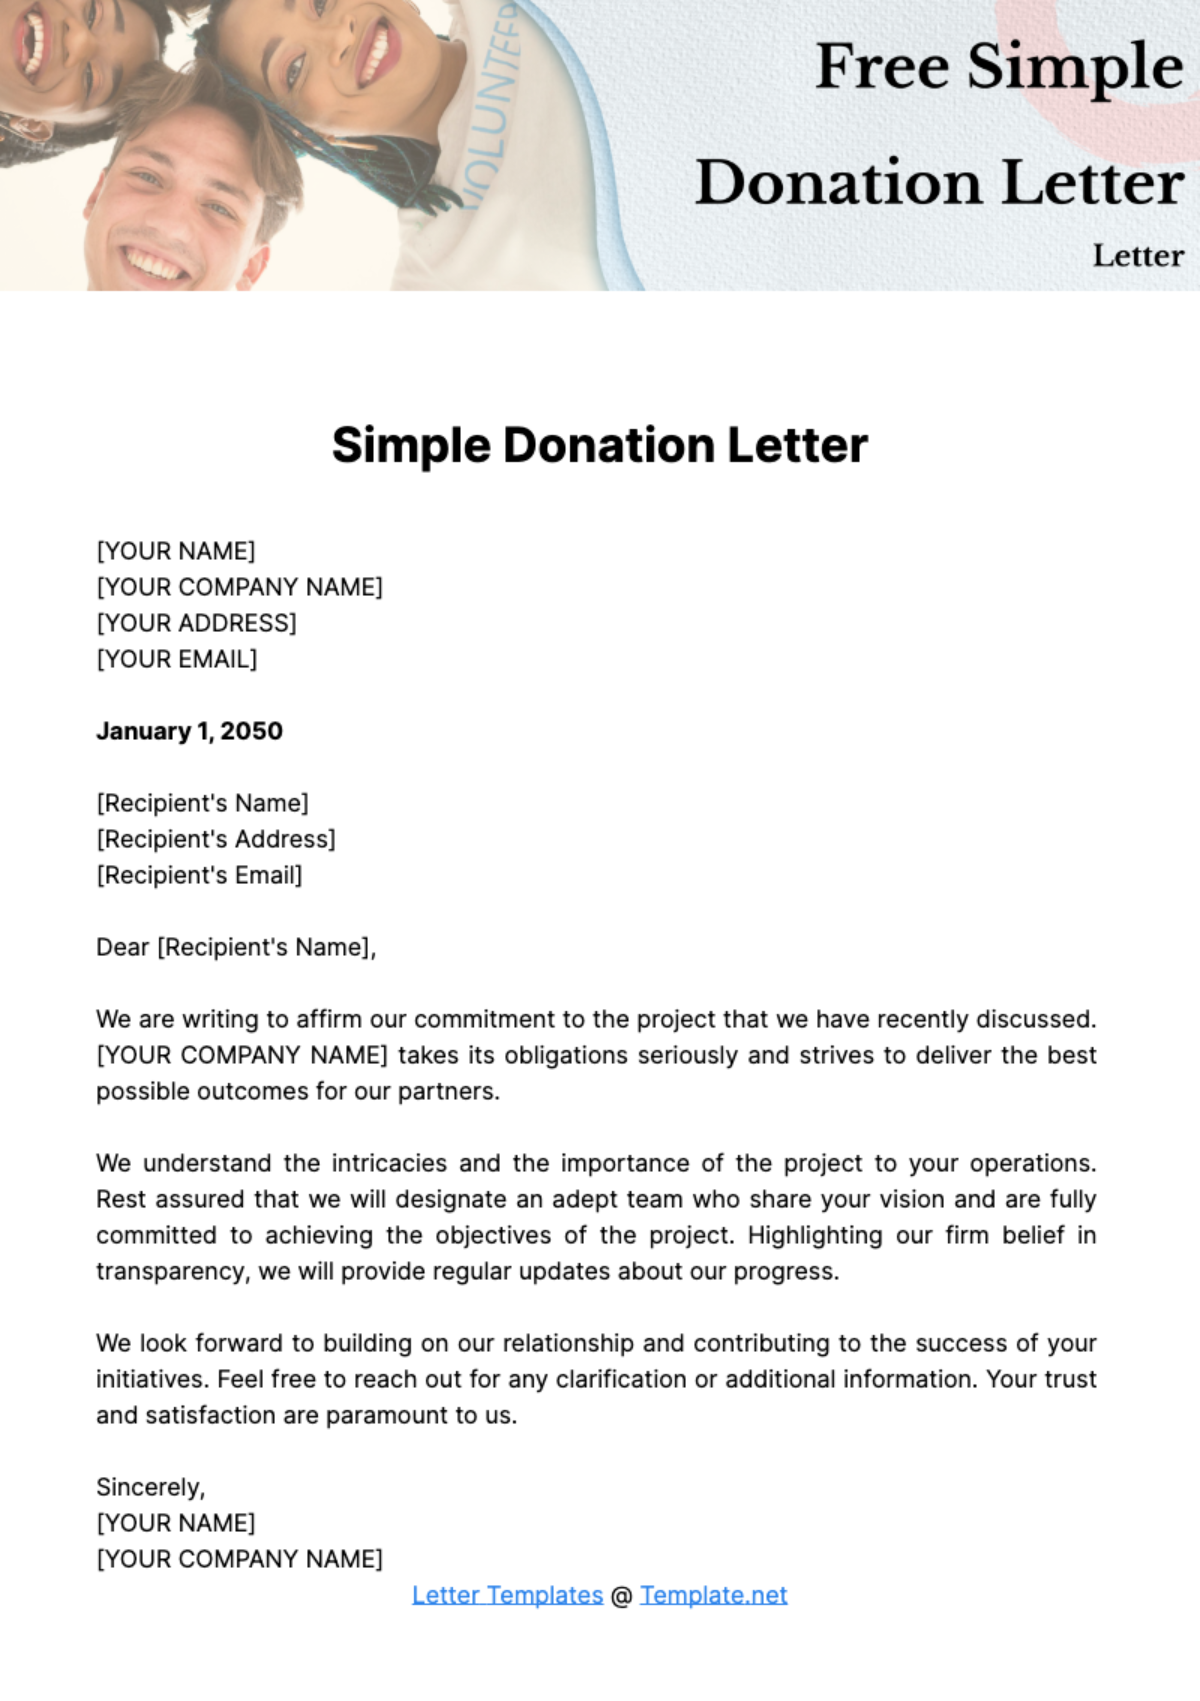 Free Simple Donation Letter Template